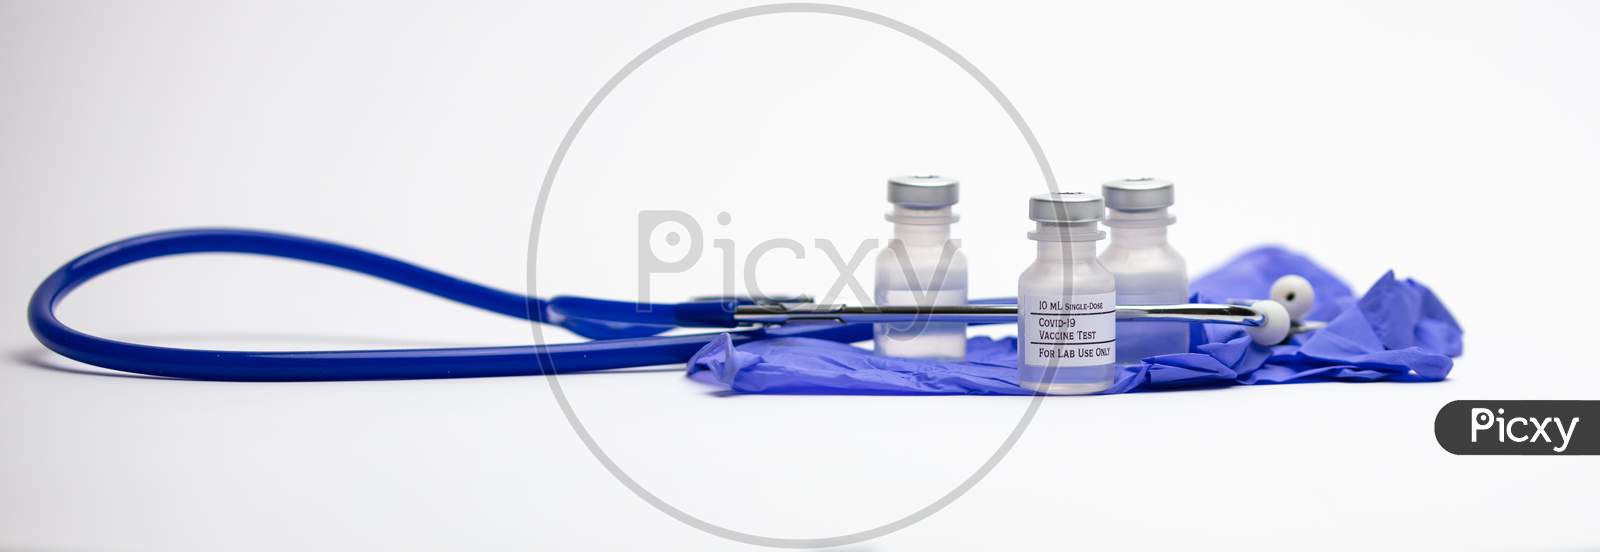 Three Covid-19 Test Vaccine Vials On Top Of Blue Medical Gloves And Surrounded By A Blue Stethoscope.